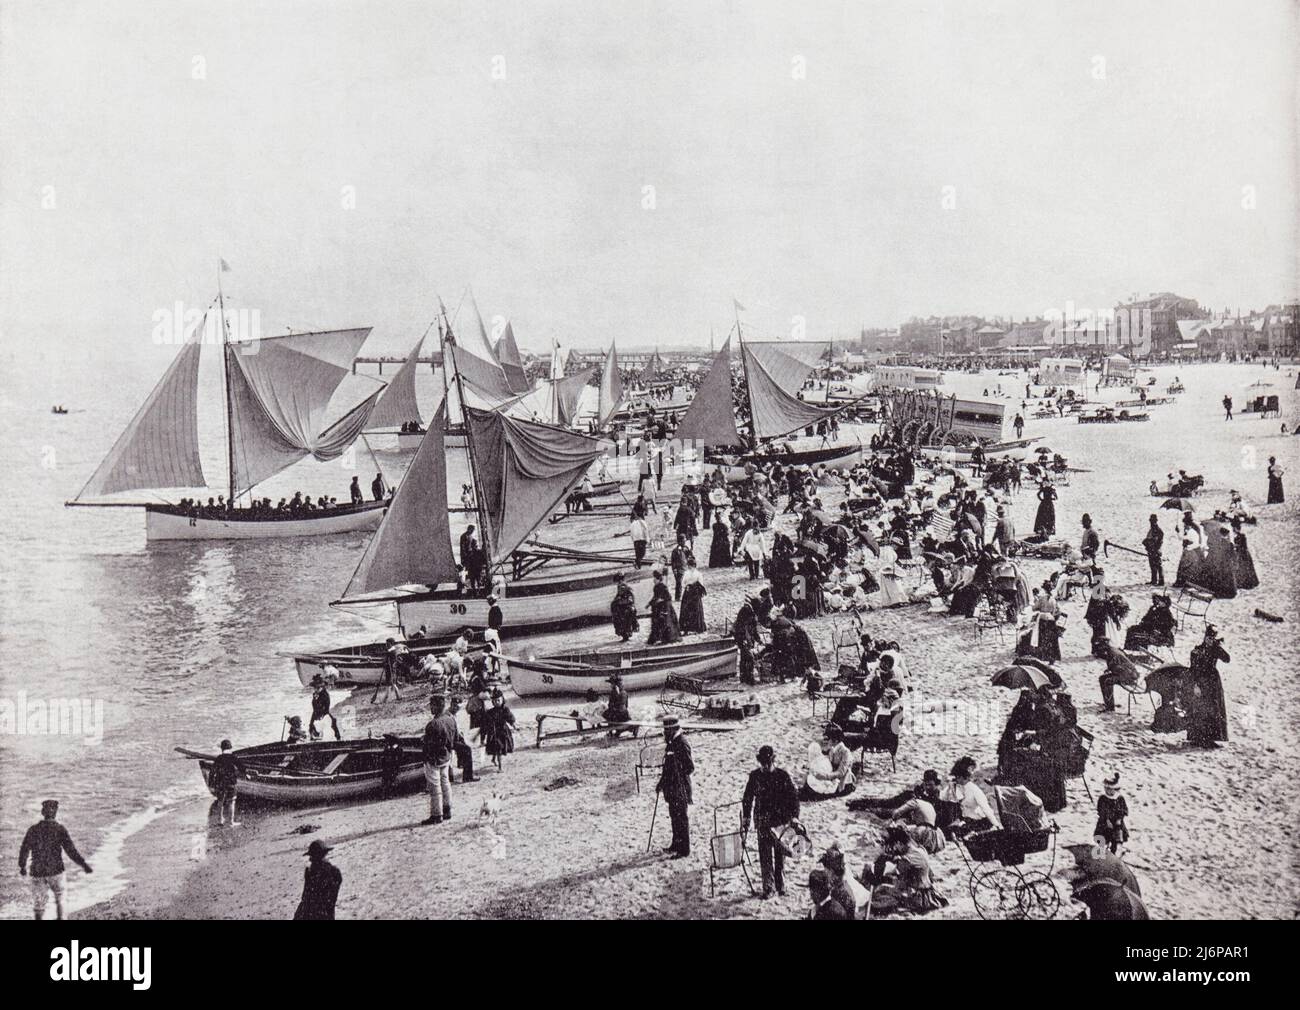 Great Yarmouth, Norfolk, England.  A typical scene on the beach in the 19th century.  From Around The Coast,  An Album of Pictures from Photographs of the Chief Seaside Places of Interest in Great Britain and Ireland published London, 1895, by George Newnes Limited. Stock Photo